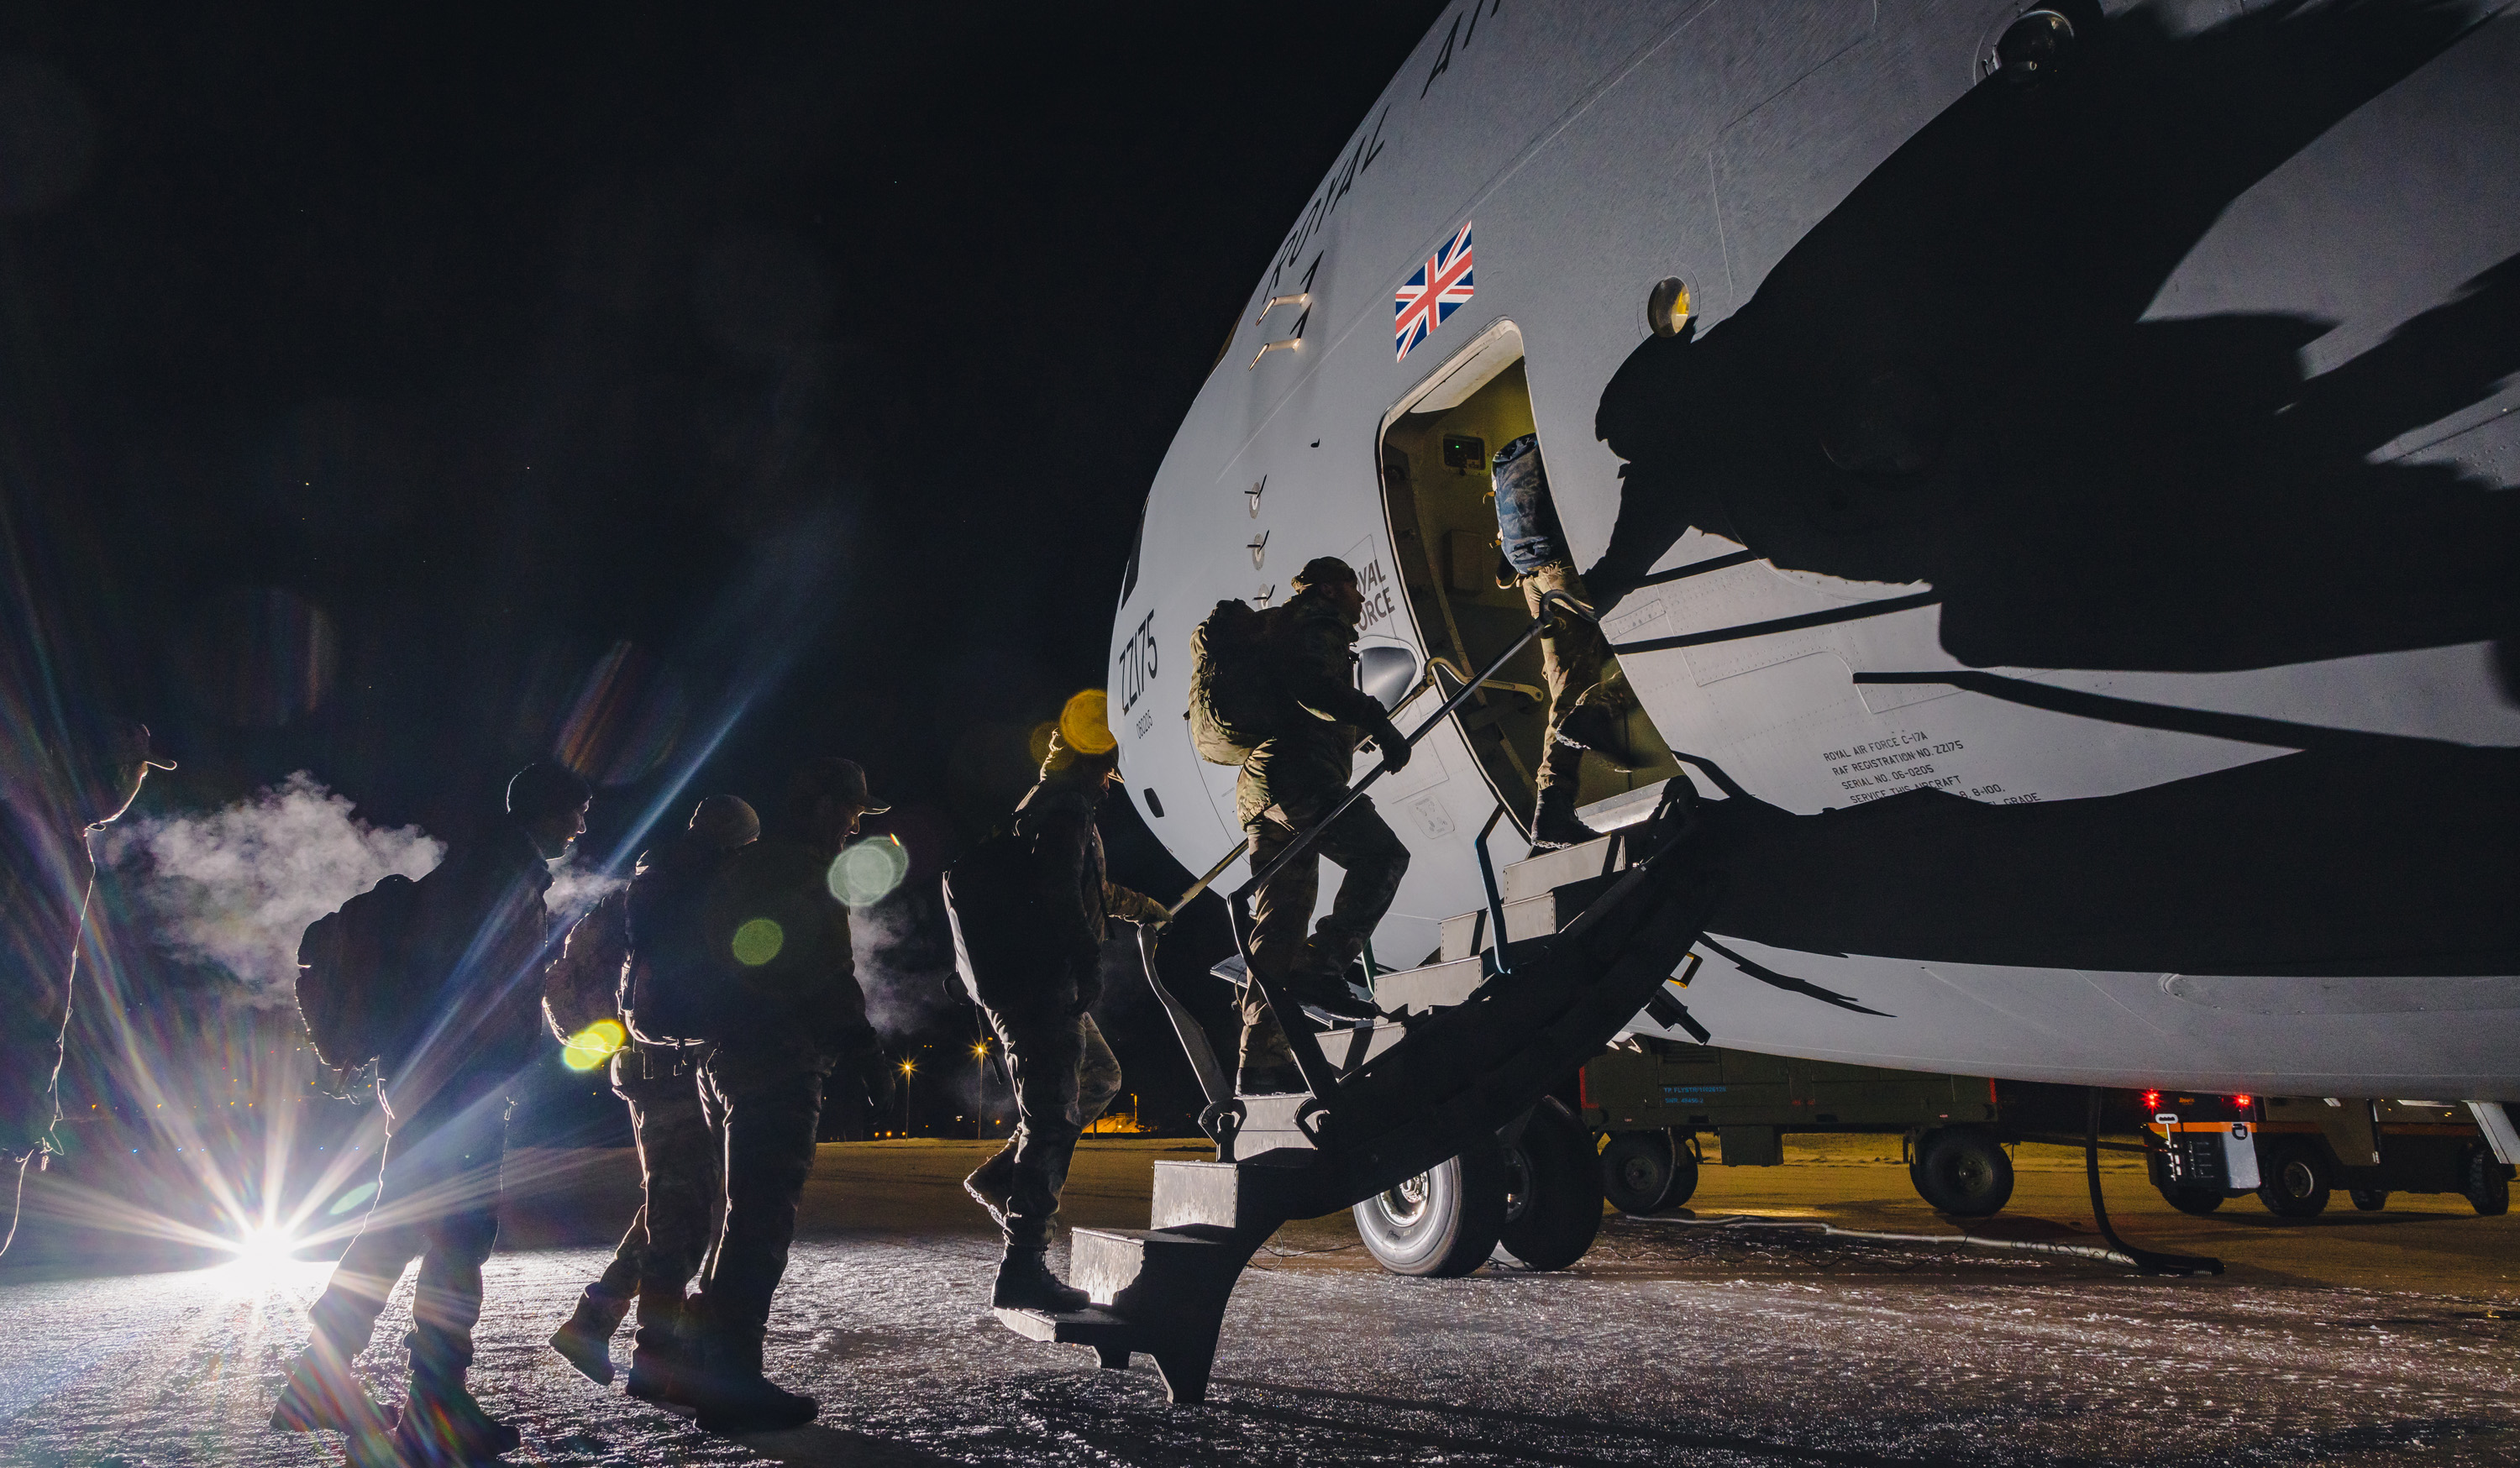 Image shows RAF aviators boarding the Globemaster on the airfield at night.